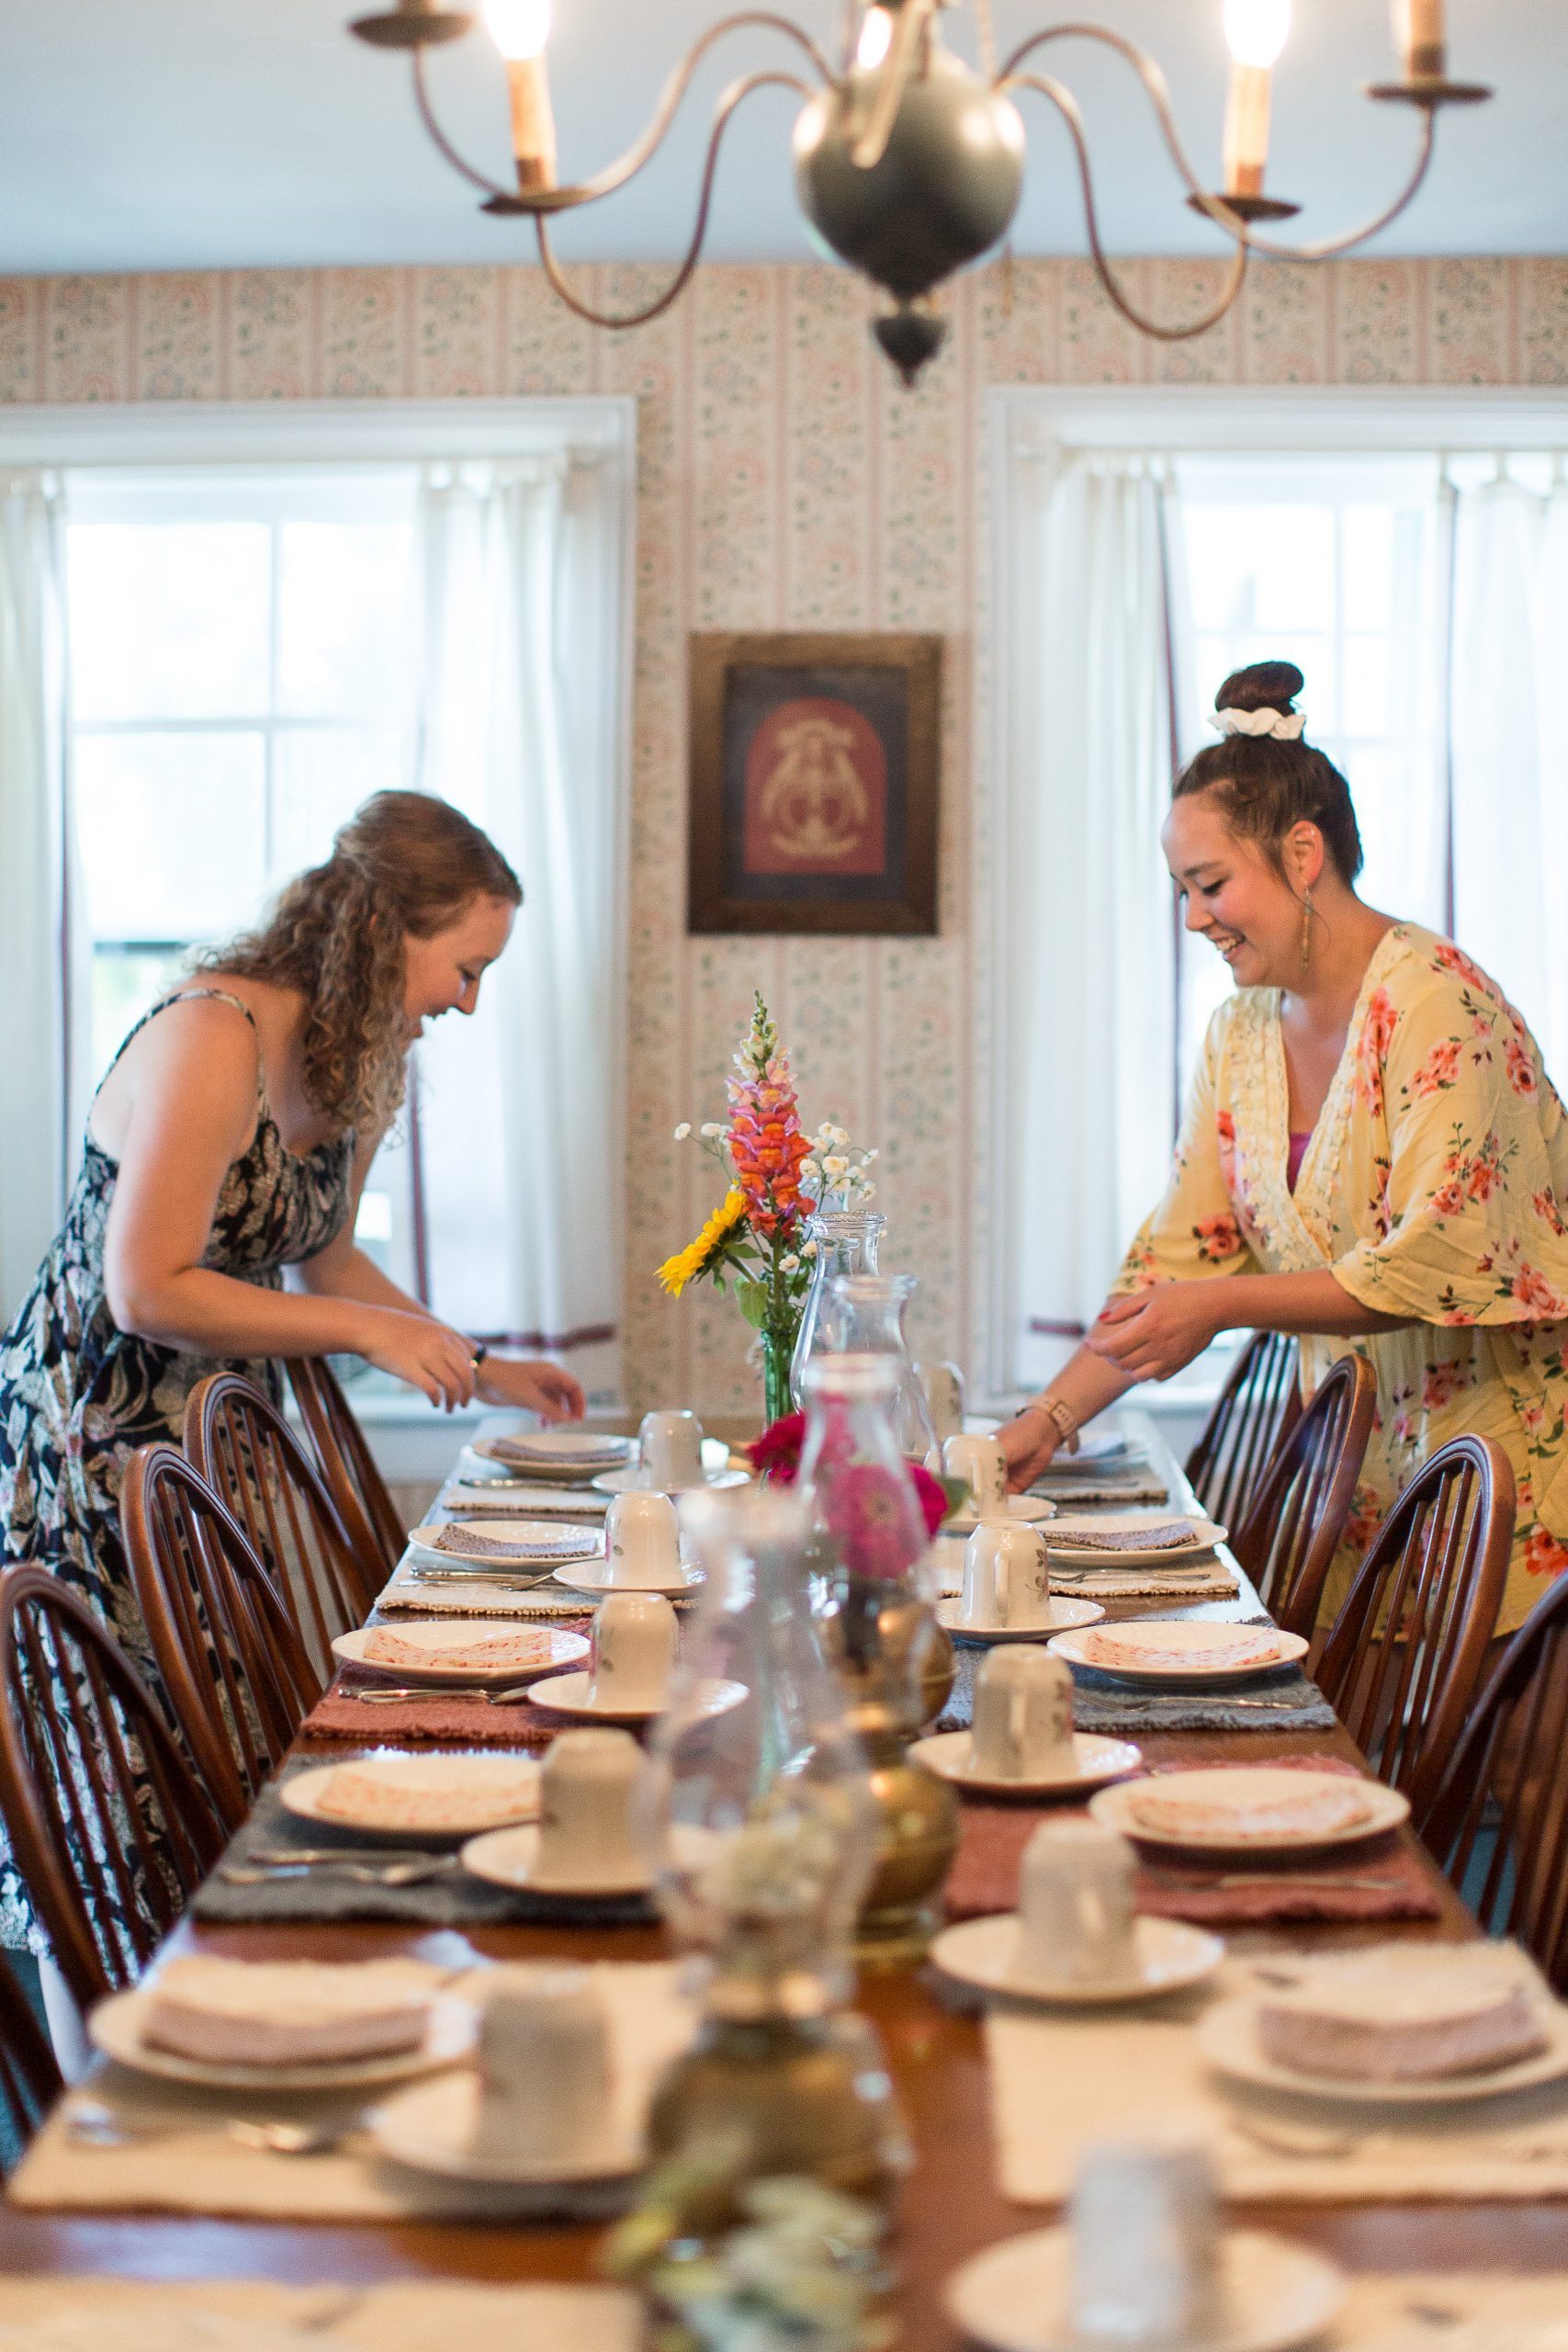 Innkeepers at Haan’s 1830 Inn bed and breakfast on Mackinac Island prepare a table for a meal at the B&B.